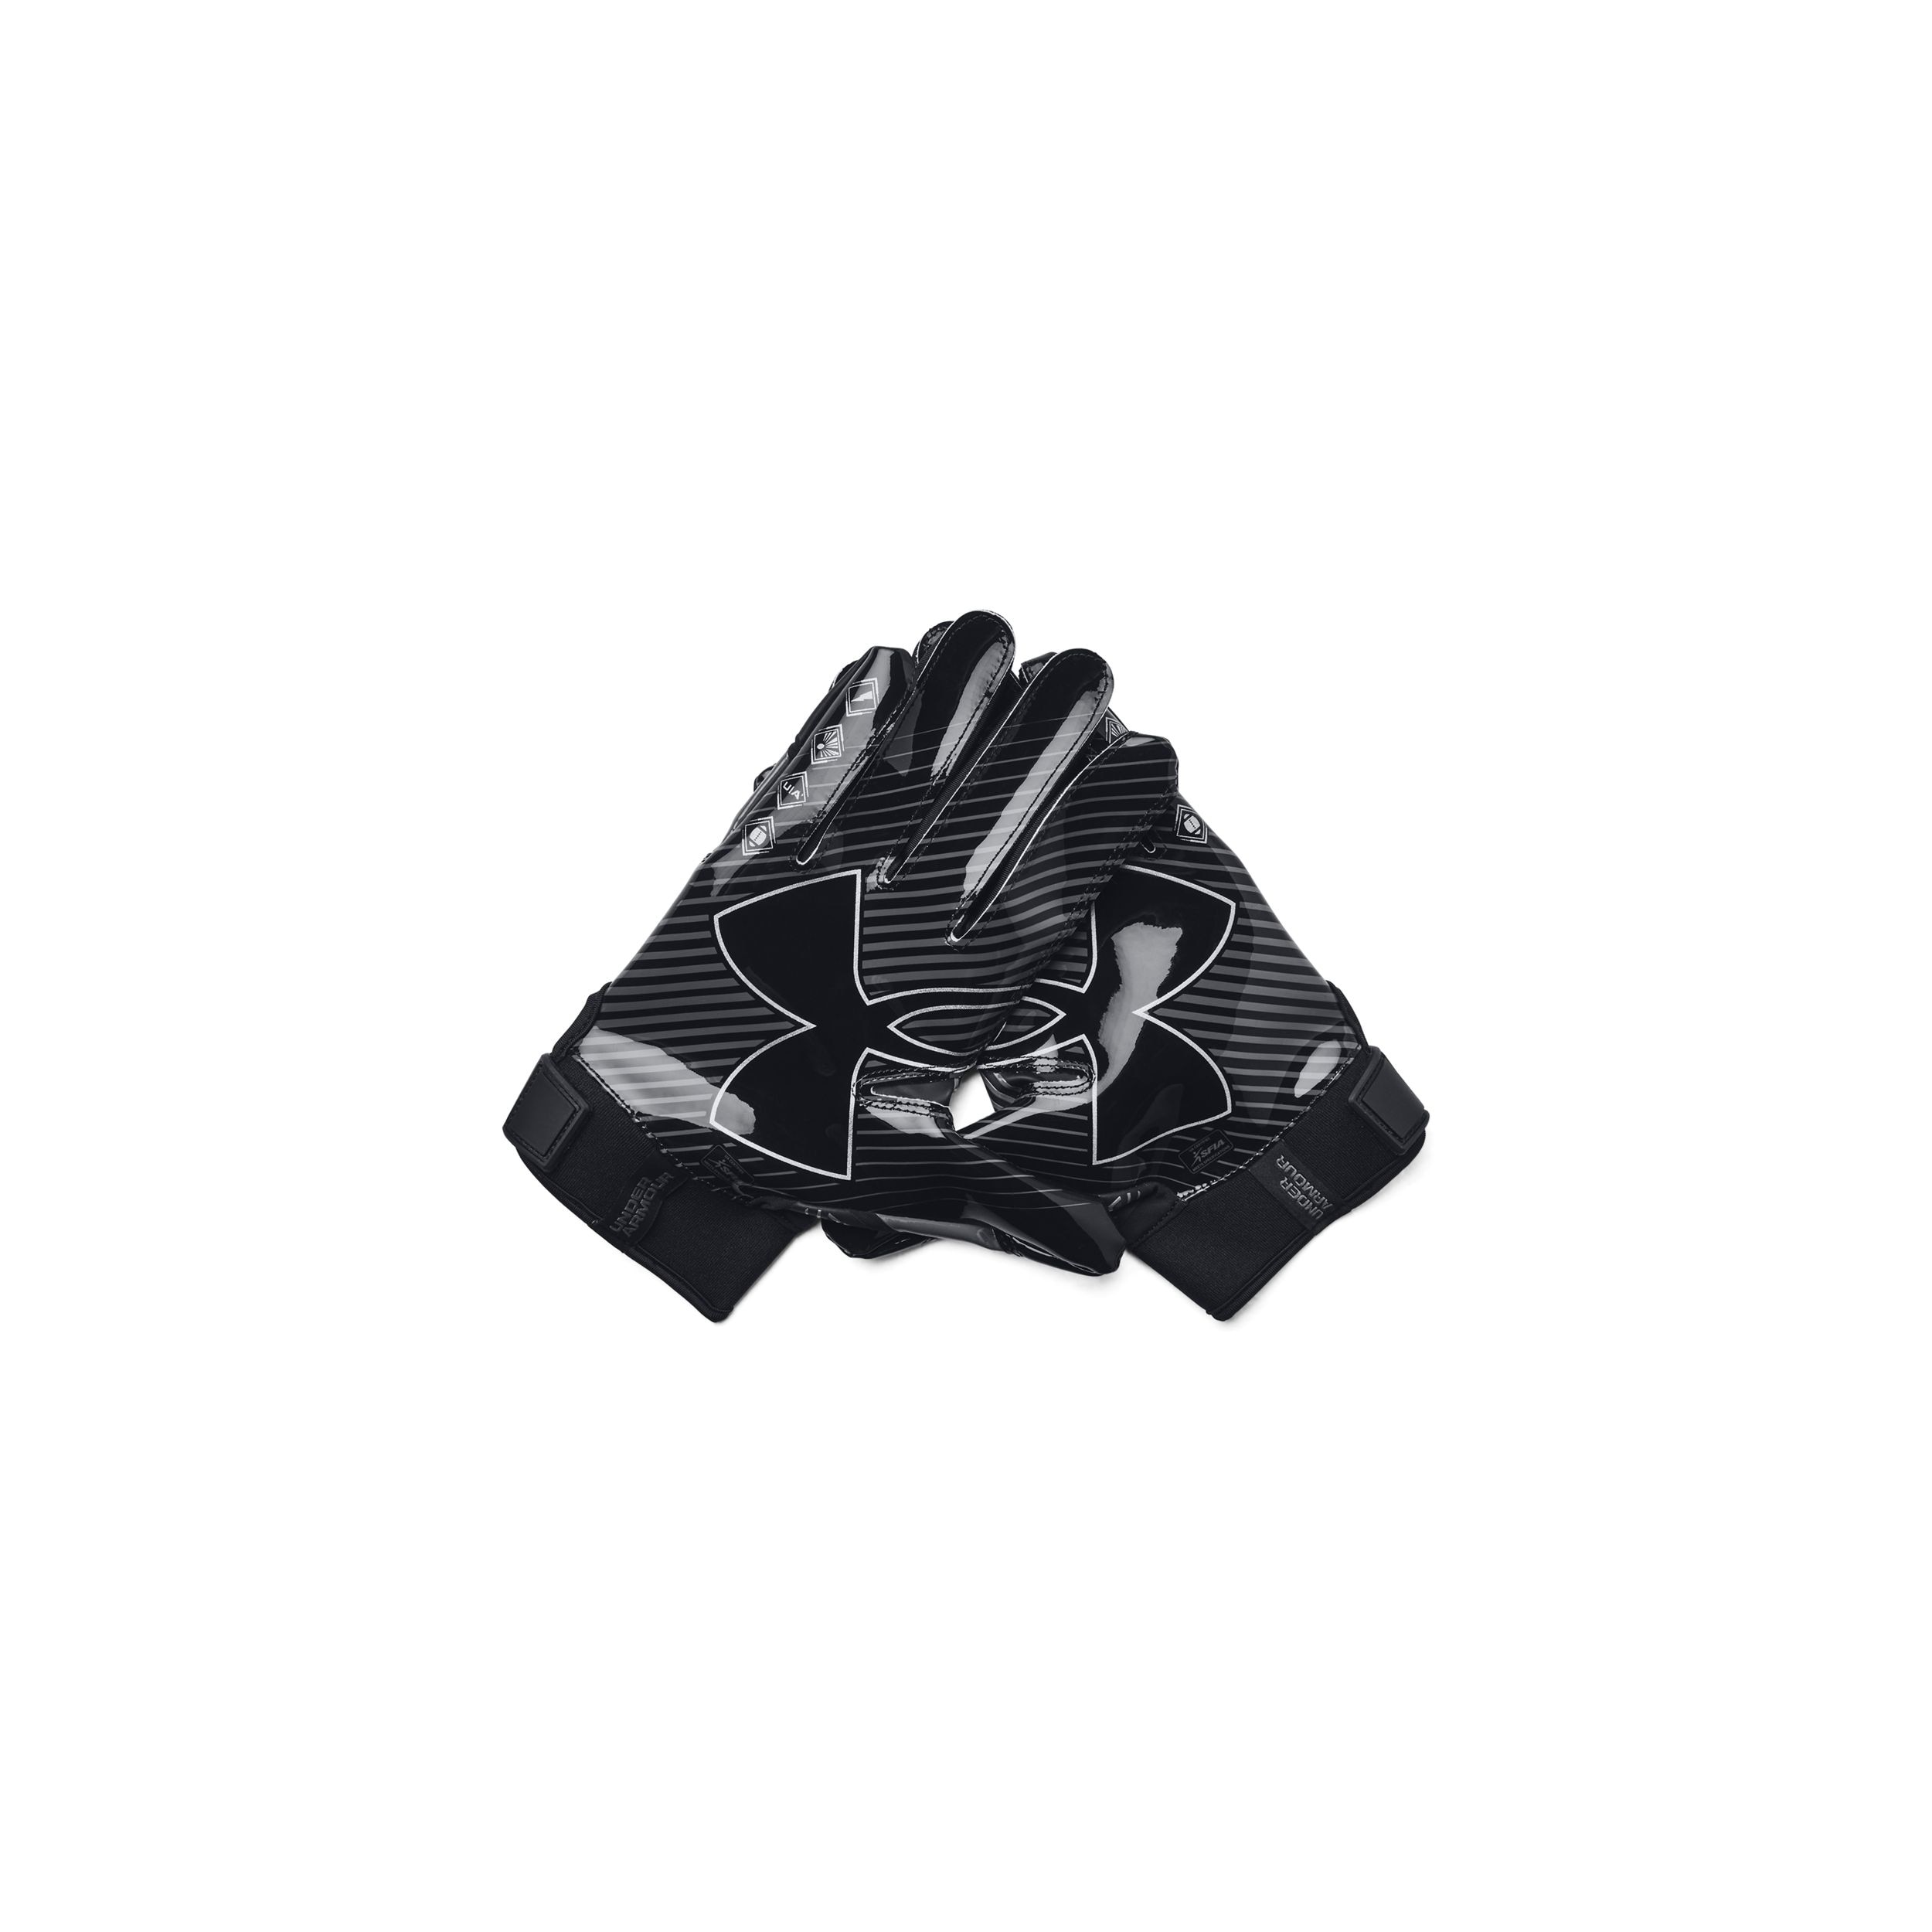 Image of Under Armour F9 Nitro Football Gloves